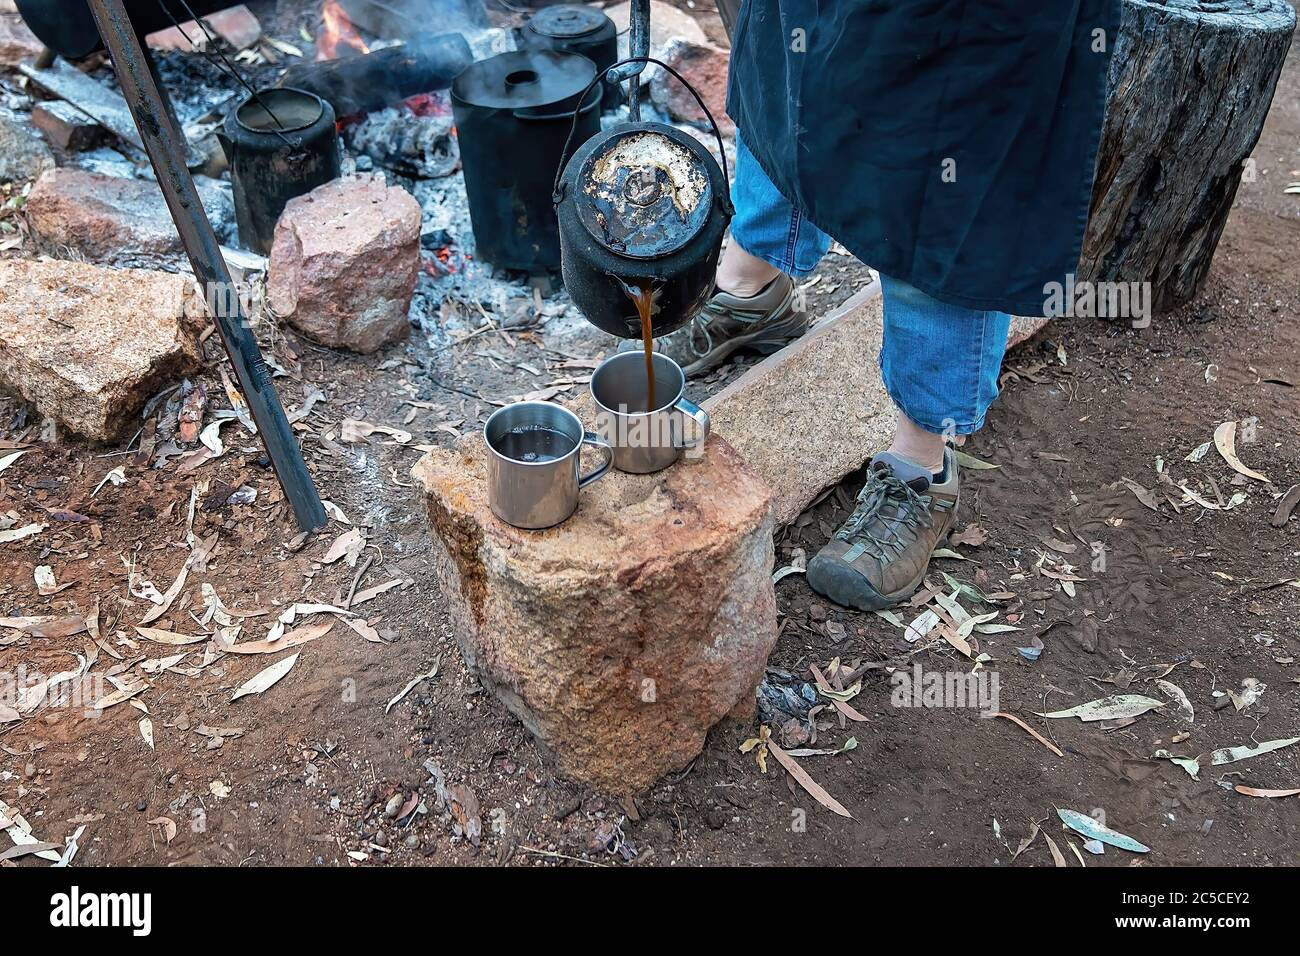 Tea and coffee from a billy at a campfire guest bush breakfast at an outback Australian tourist resort in a volcanic national park Stock Photo